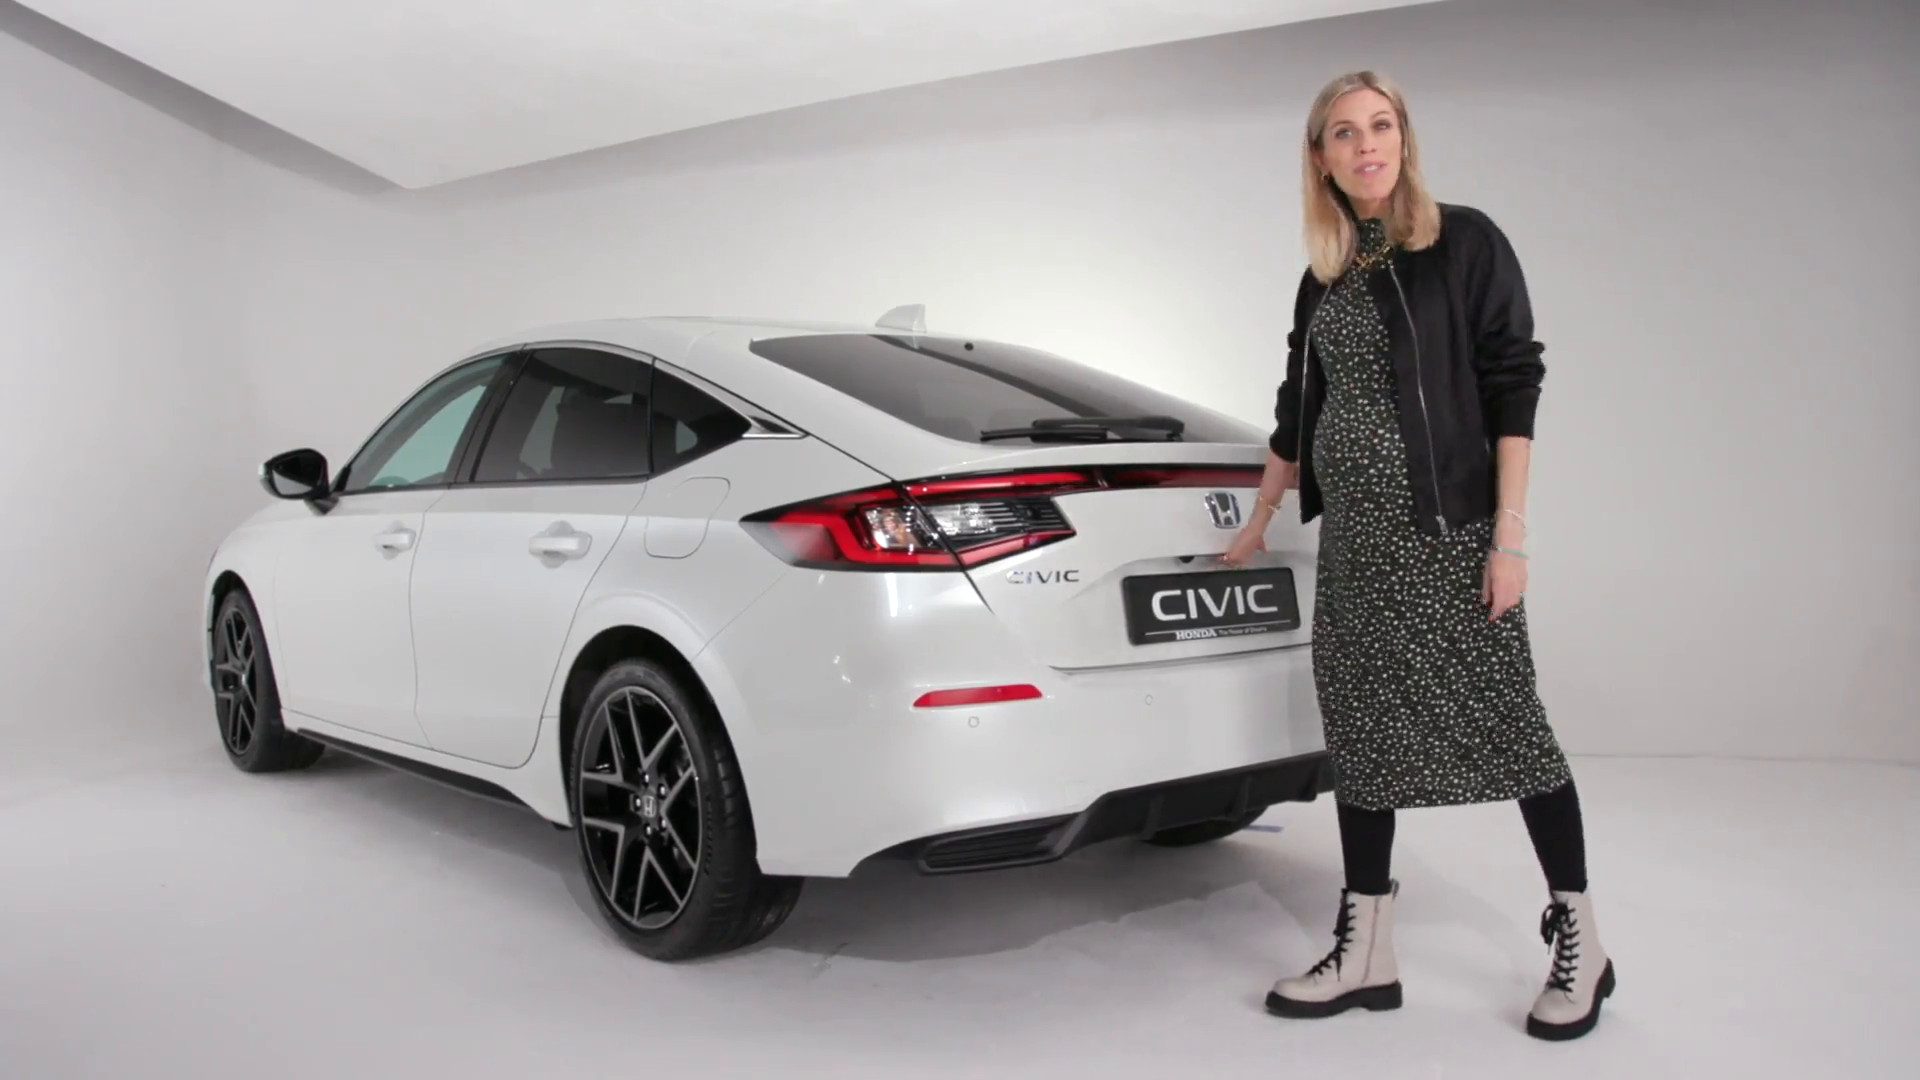 Nicki Shields Formula E presenter gives a personal touch of the all-new Honda Civic Hybrid